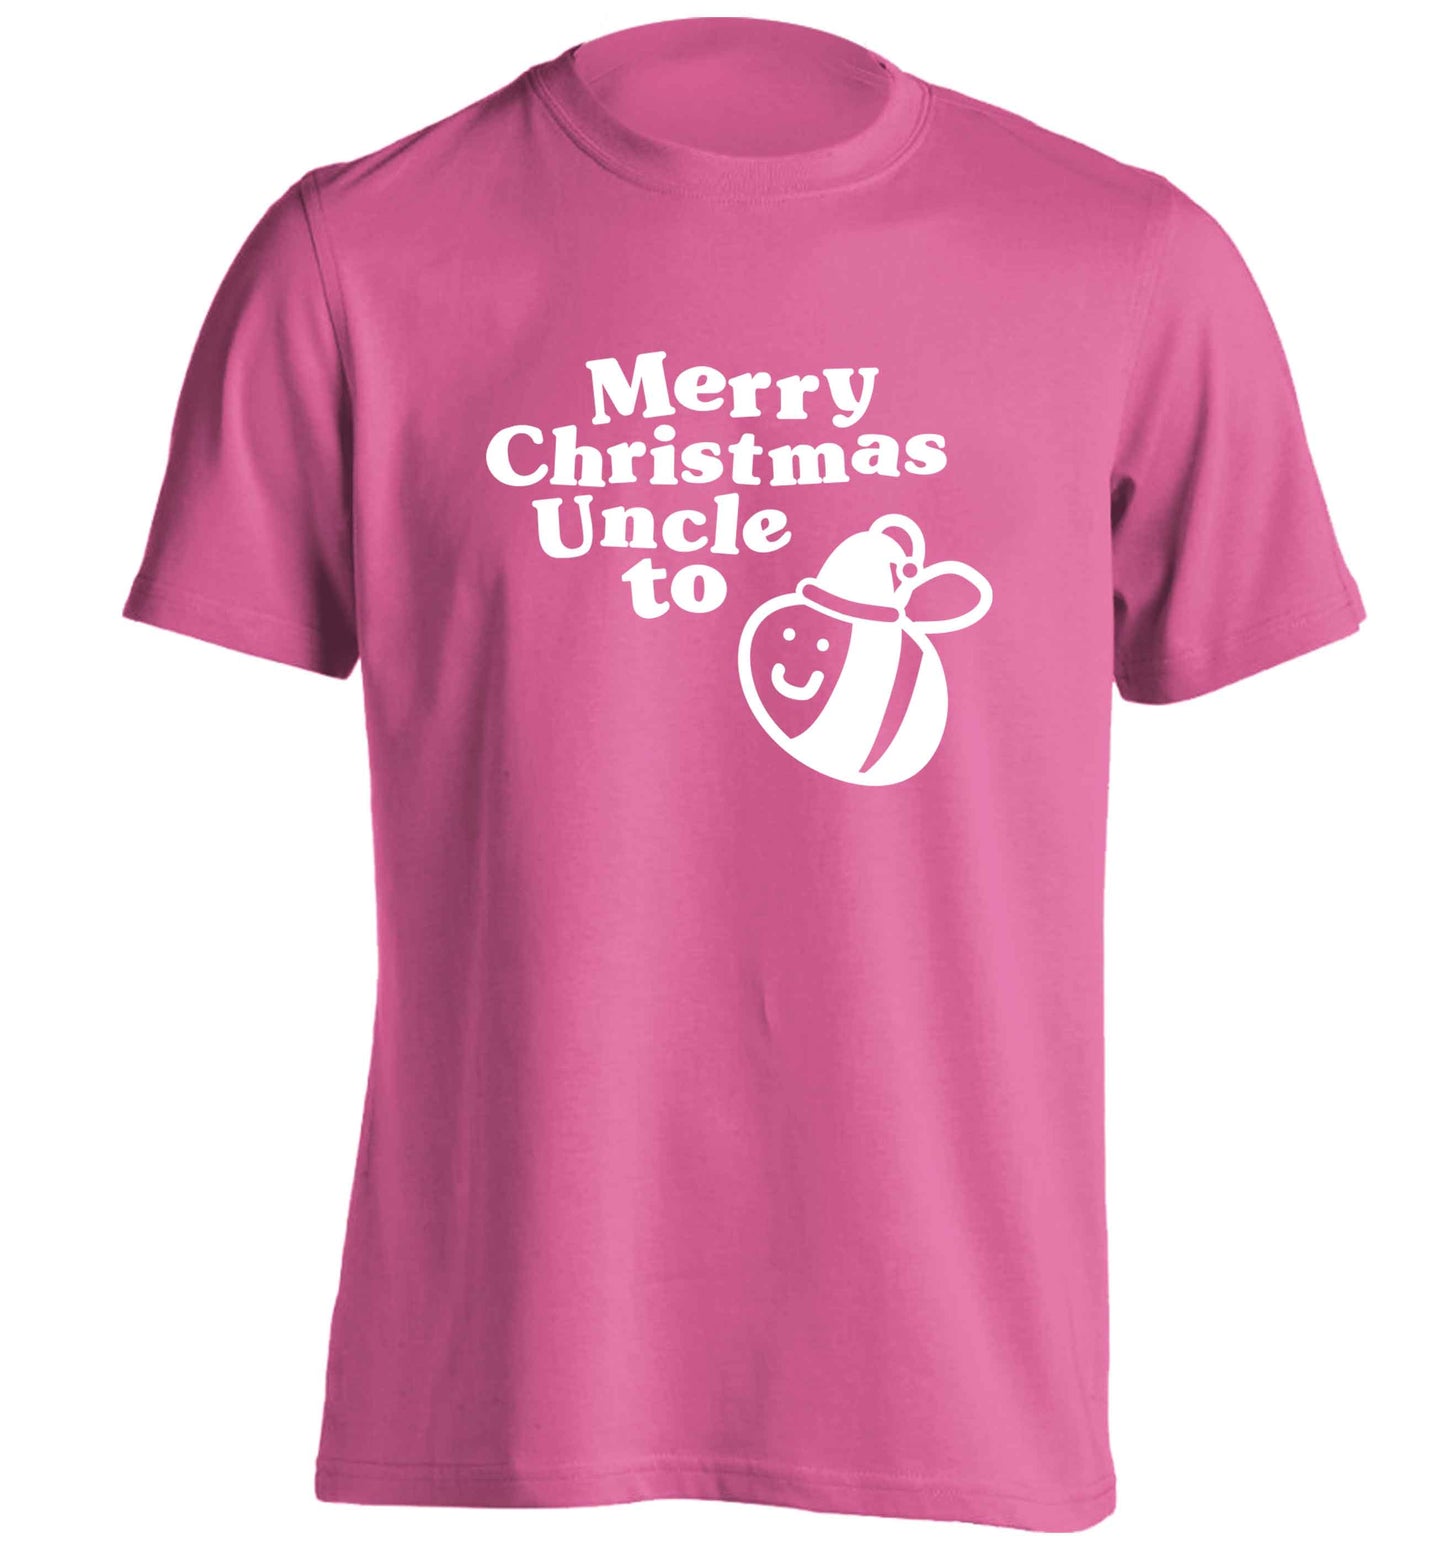 Merry Christmas uncle to be adults unisex pink Tshirt 2XL